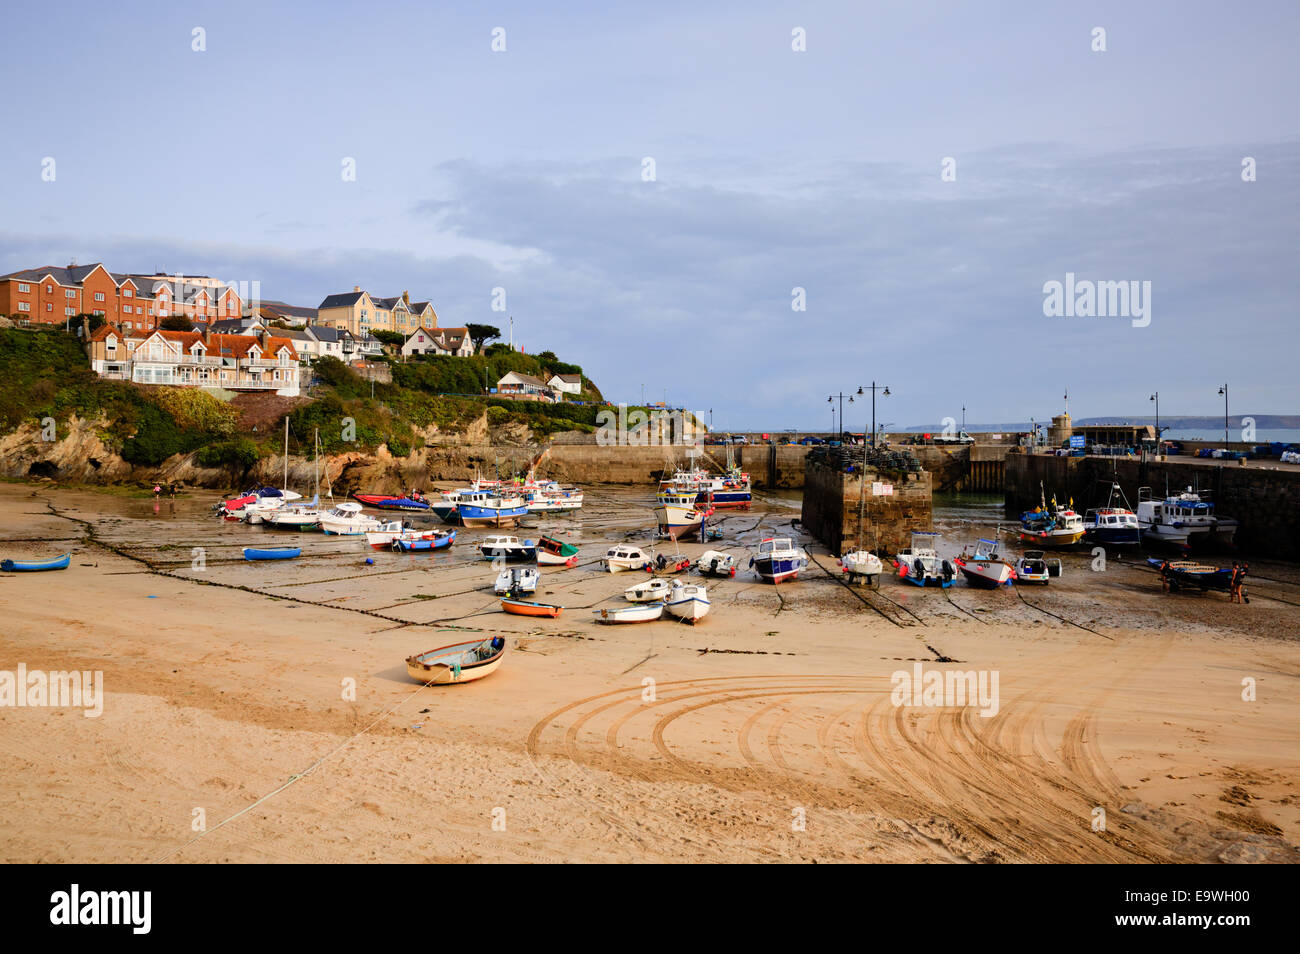 Newquay harbour North Cornwall England UK with boats and sandy beach and houses on hill Stock Photo